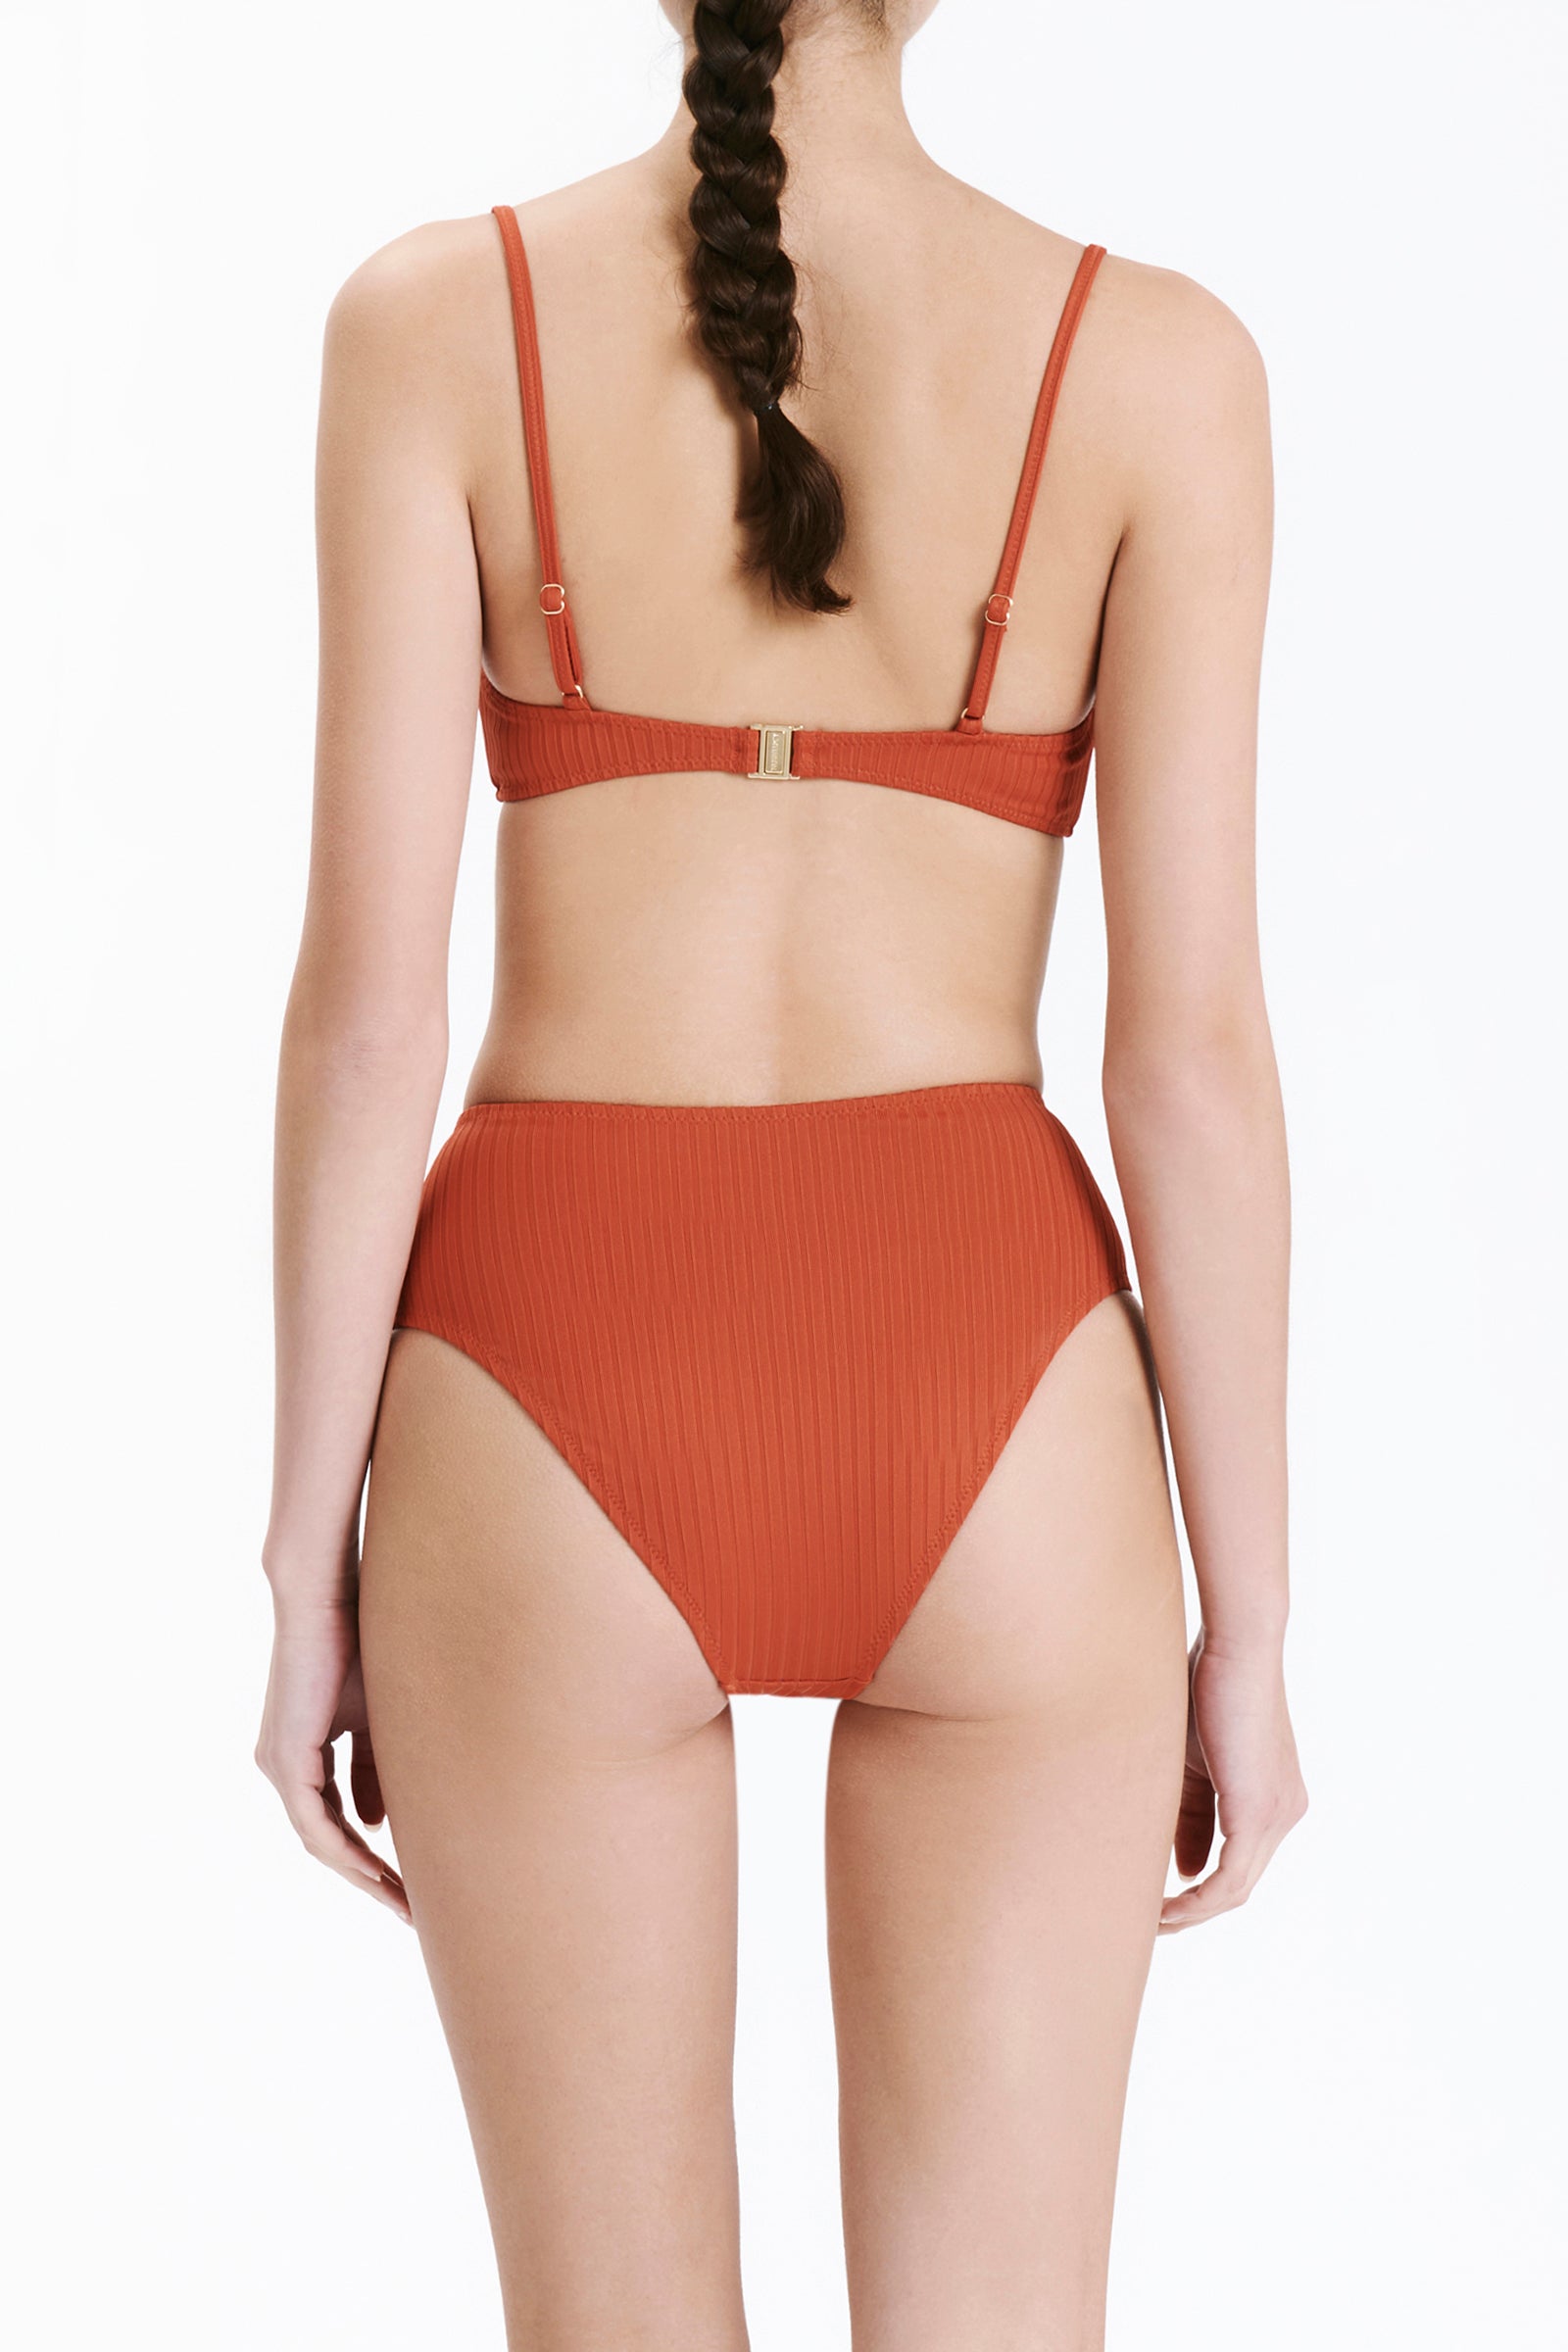 Nude Lucy Classic Bandeau Top In A Terracotta Rooibos Colour 